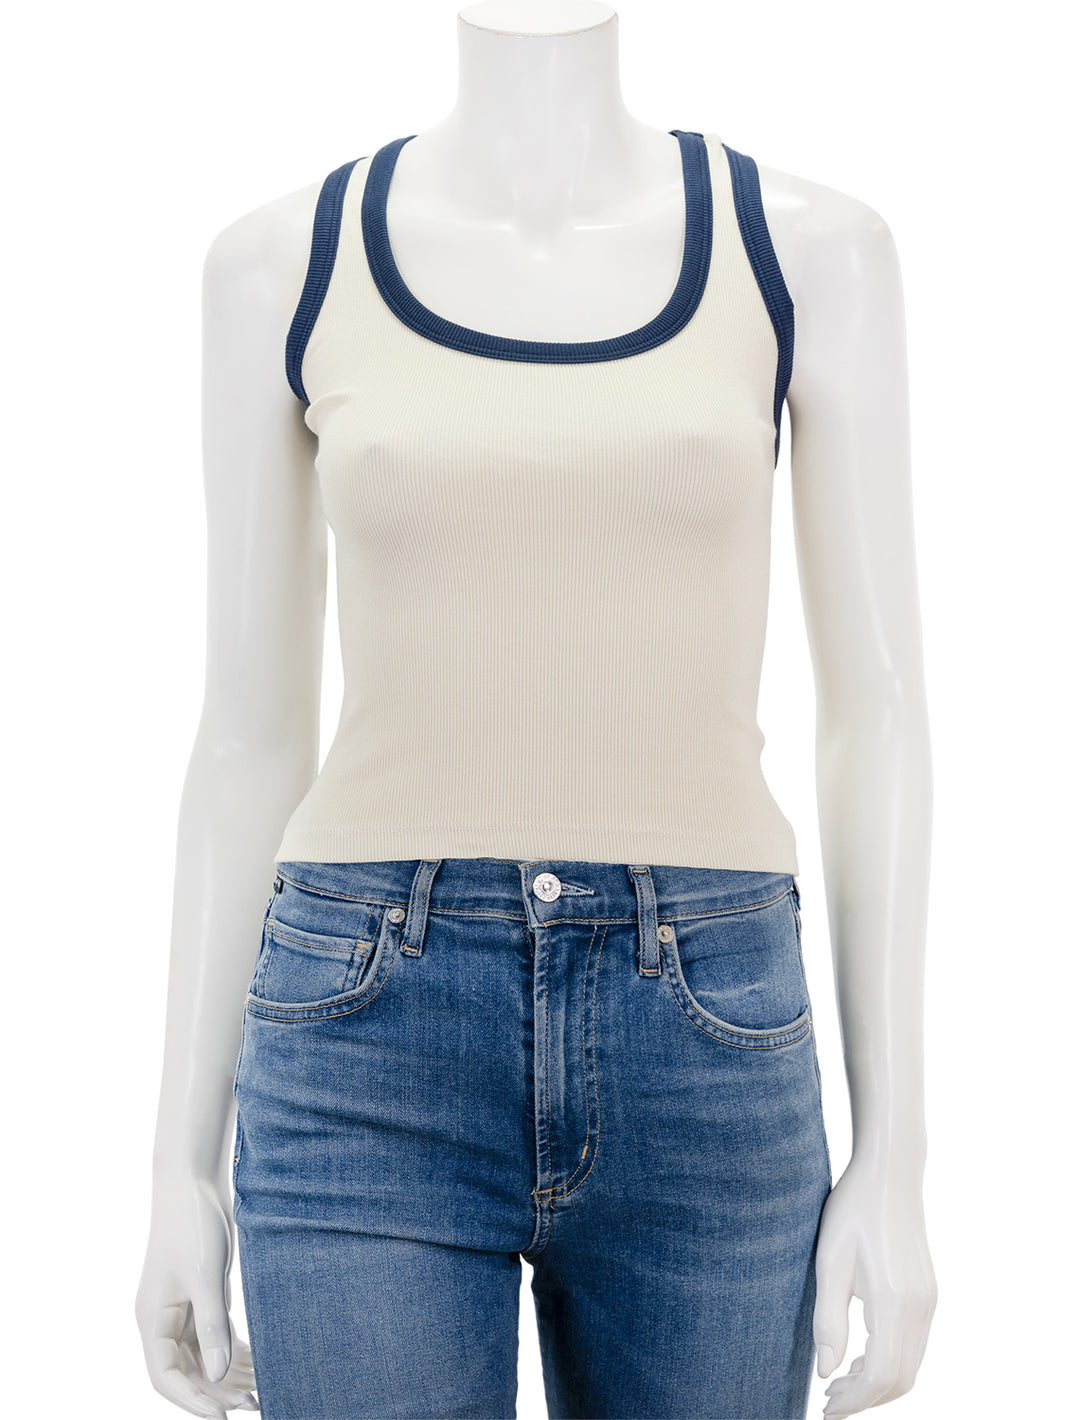 Front view of Sundry's scoopneck crop tank in cream and navy.